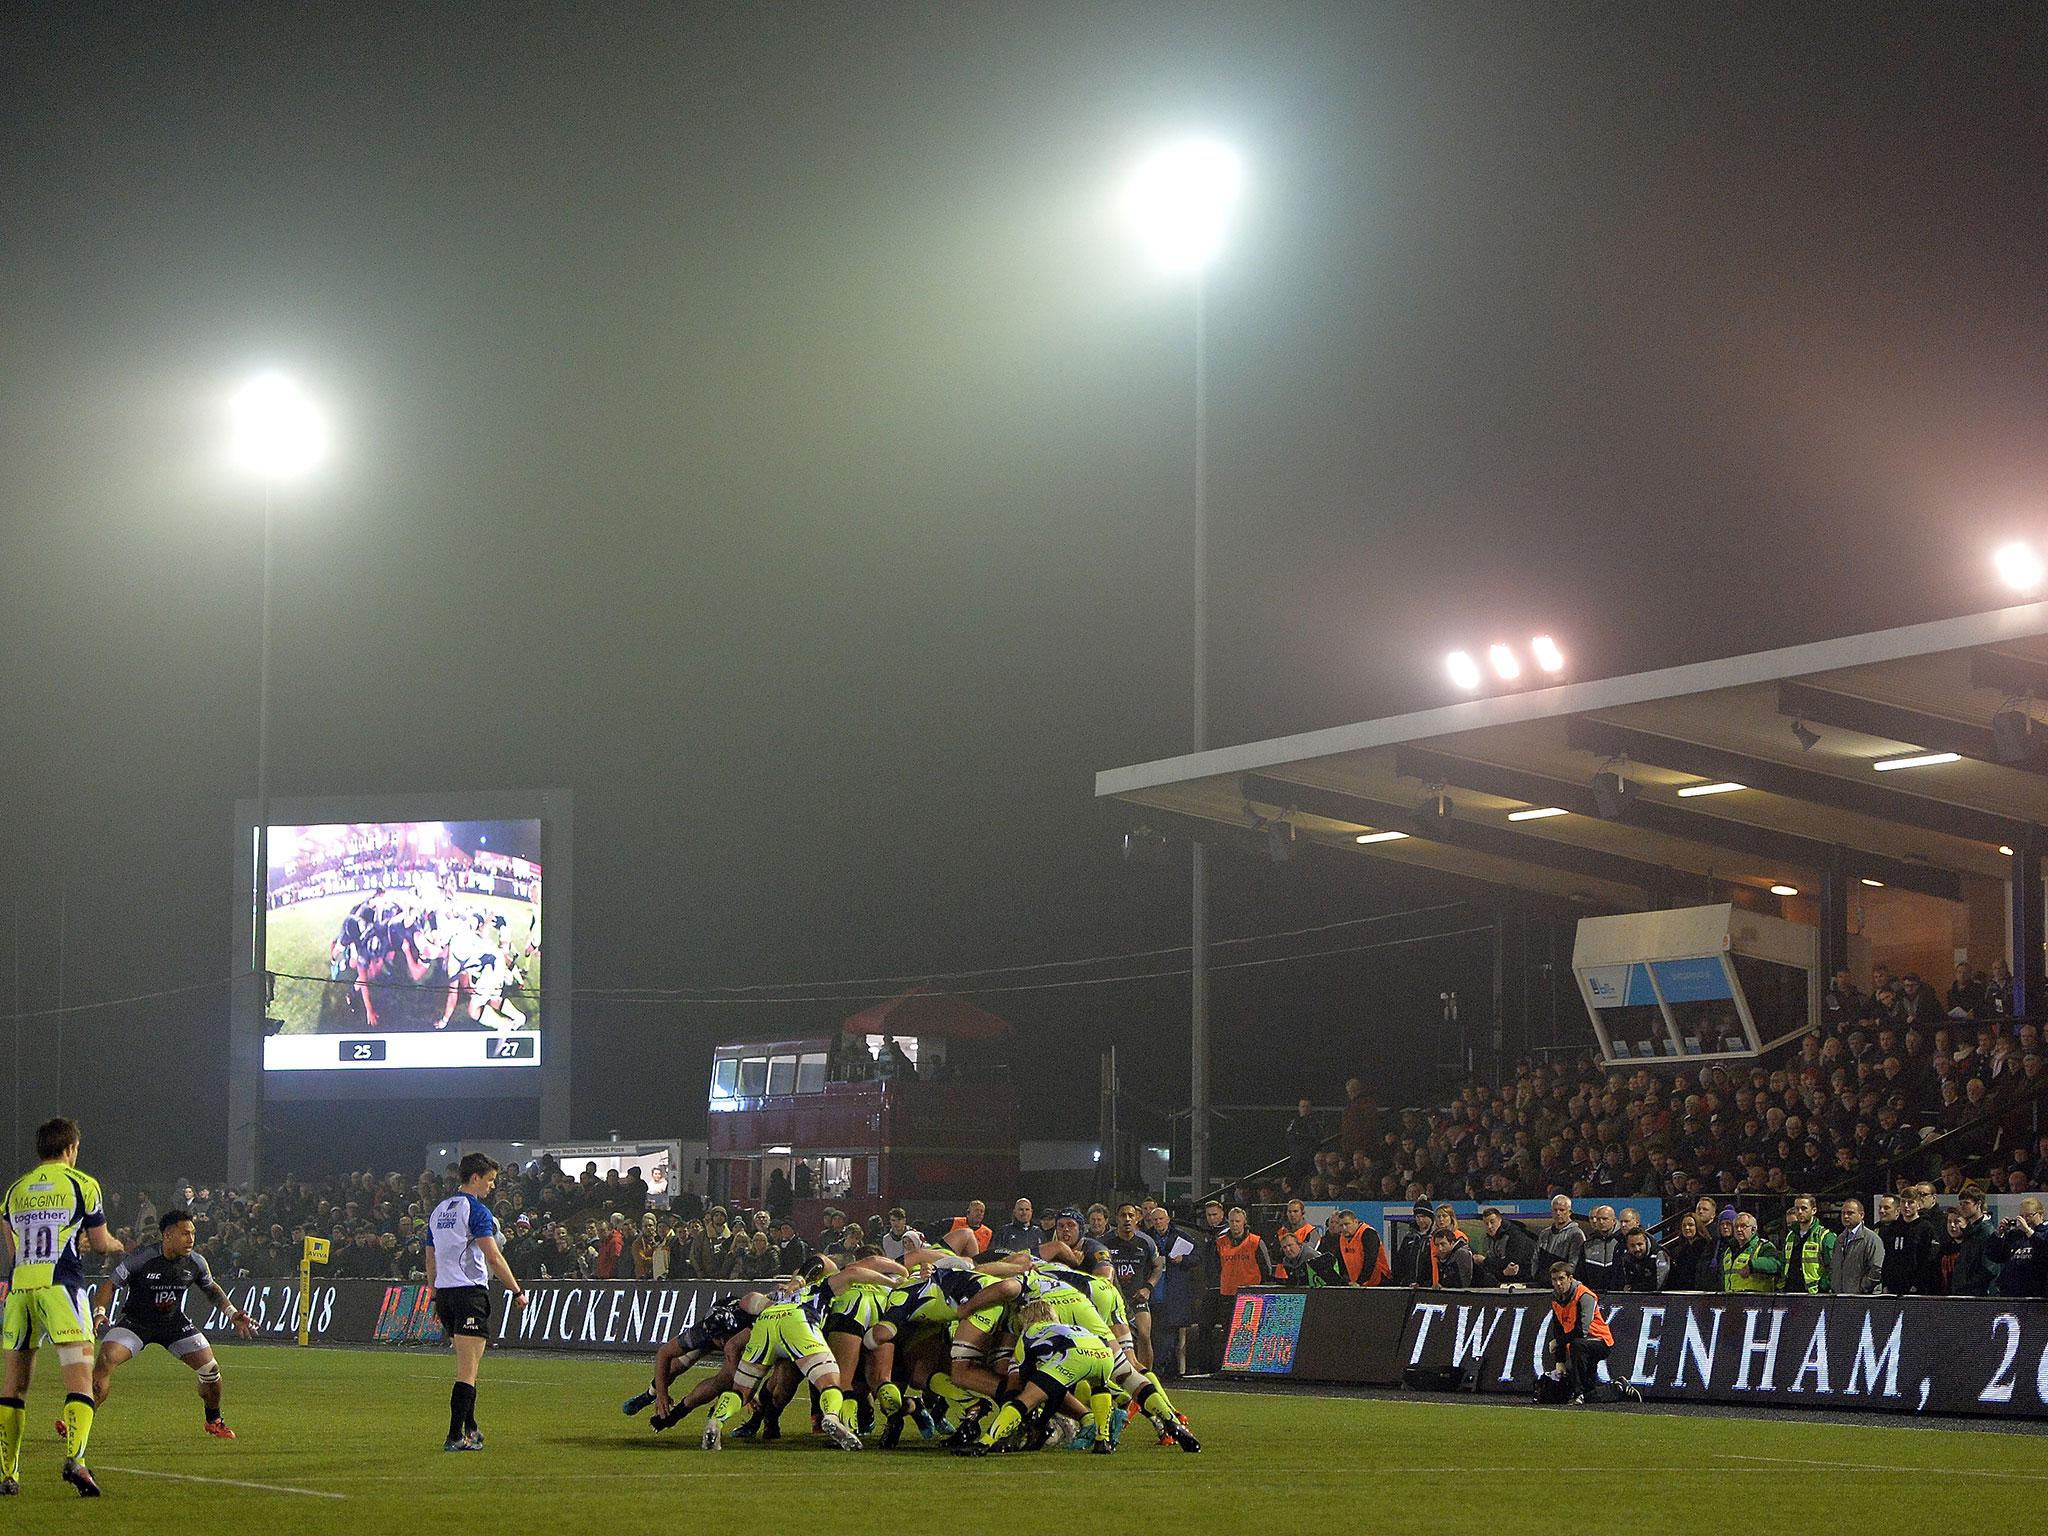 A sell-out crowd of 10,000 at Kingston Park is expected for when Wasps visit on 5 May